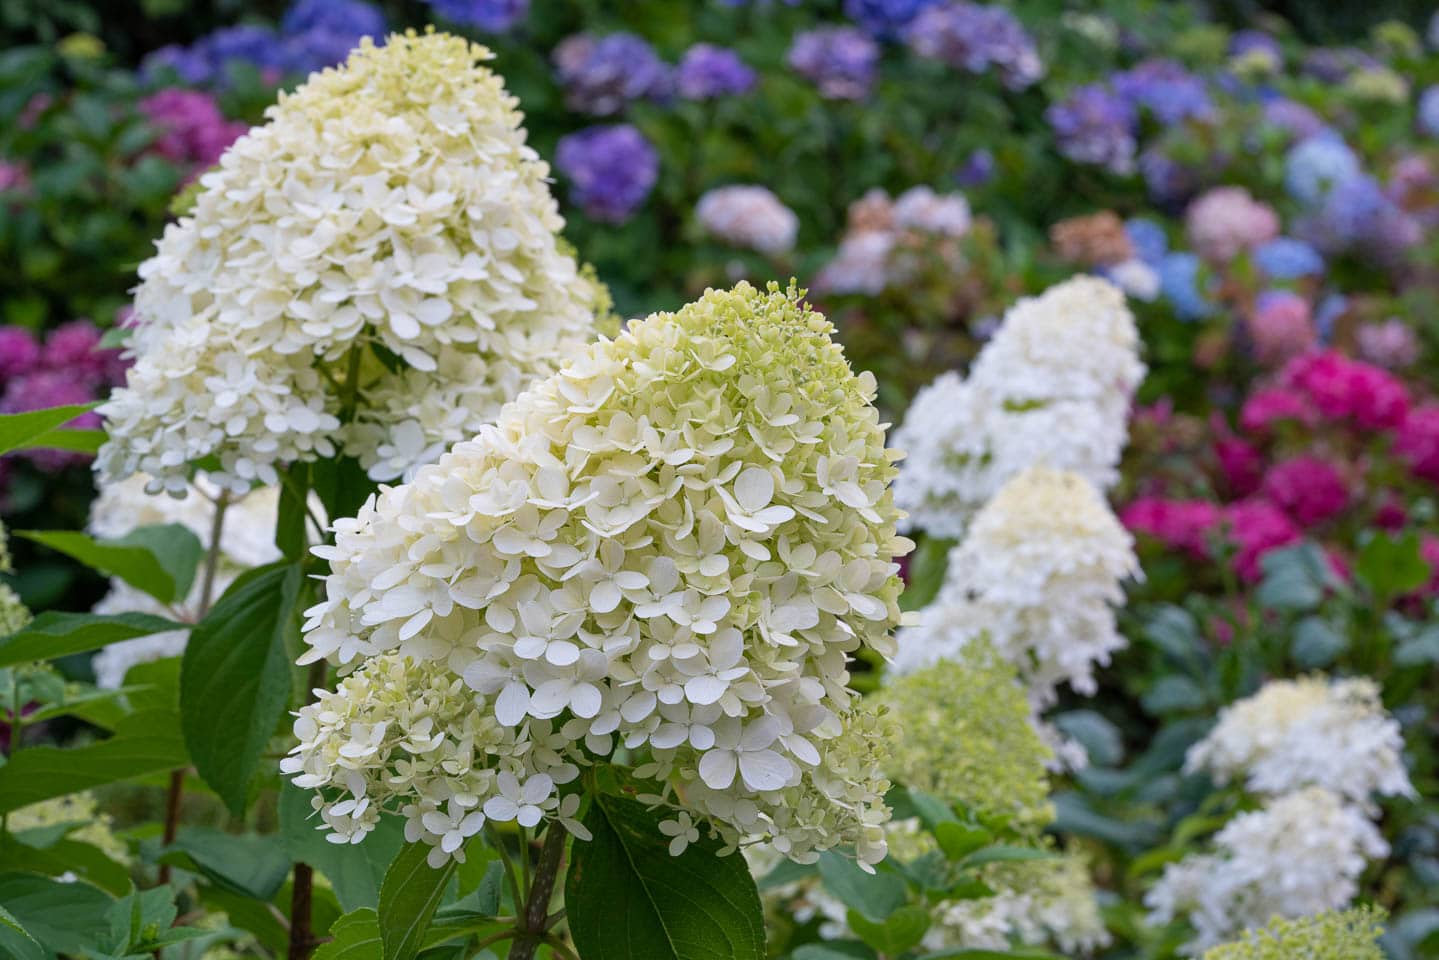 White Hydrangea paniculata blooms with a cottage garden in the background